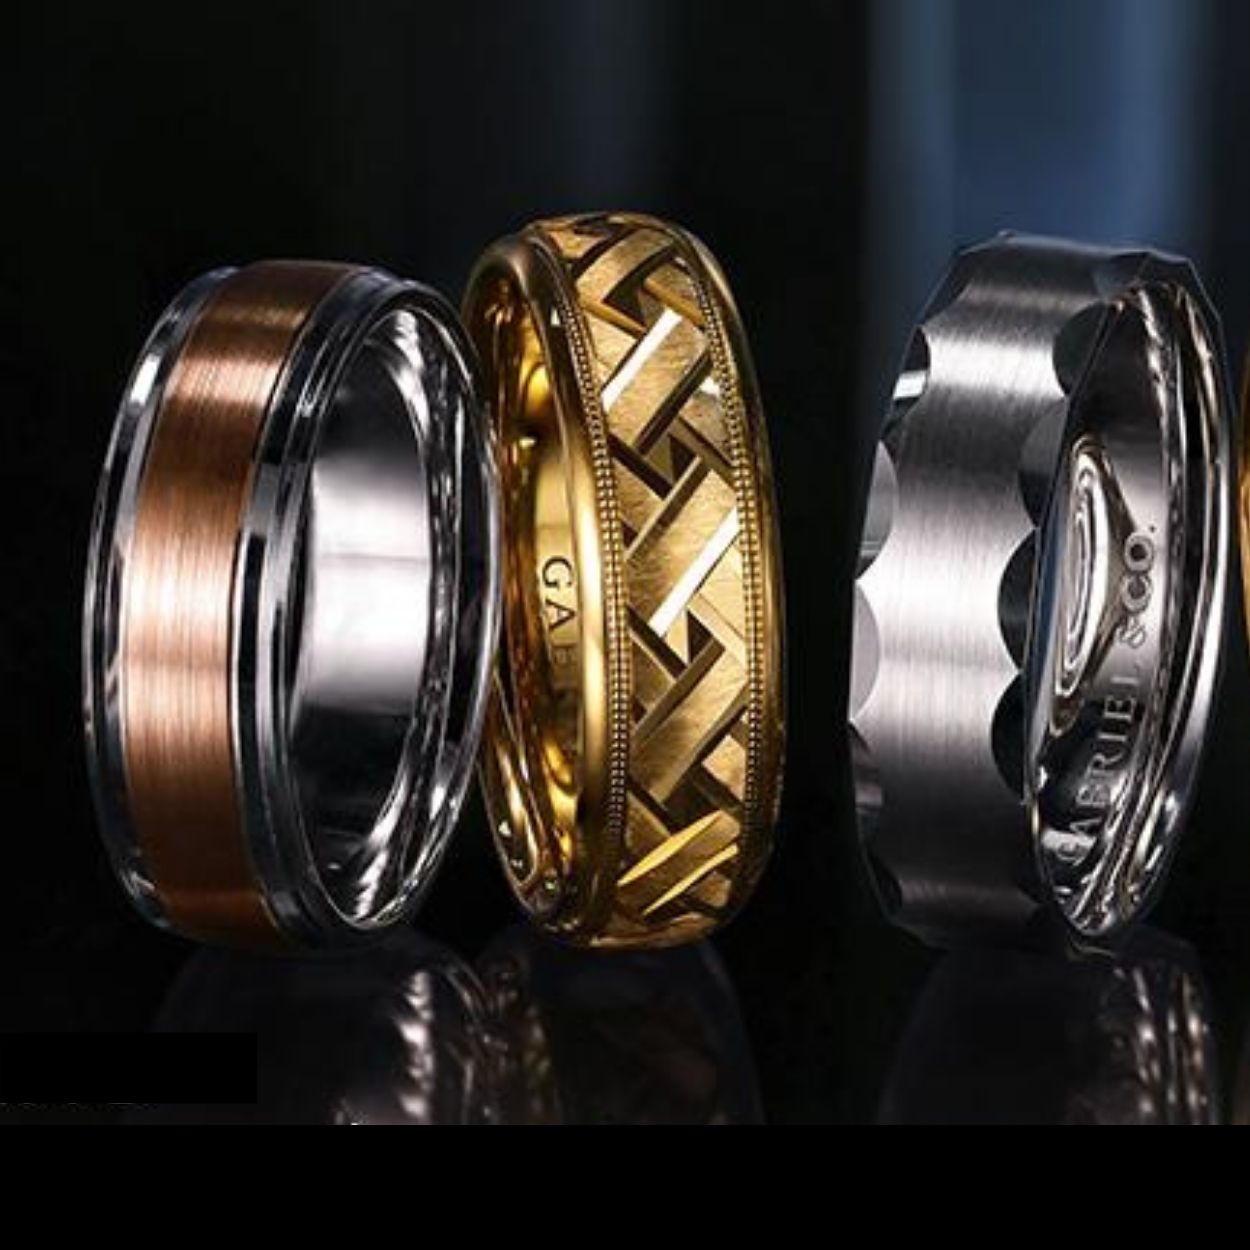 Gold Wedding Bands With Unique Design. Faceted Wedding Rings. Couple Wedding  Rings Gold. His and Hers Wedding Rings Set - Etsy | Couple wedding rings, Wedding  rings, Mens wedding bands